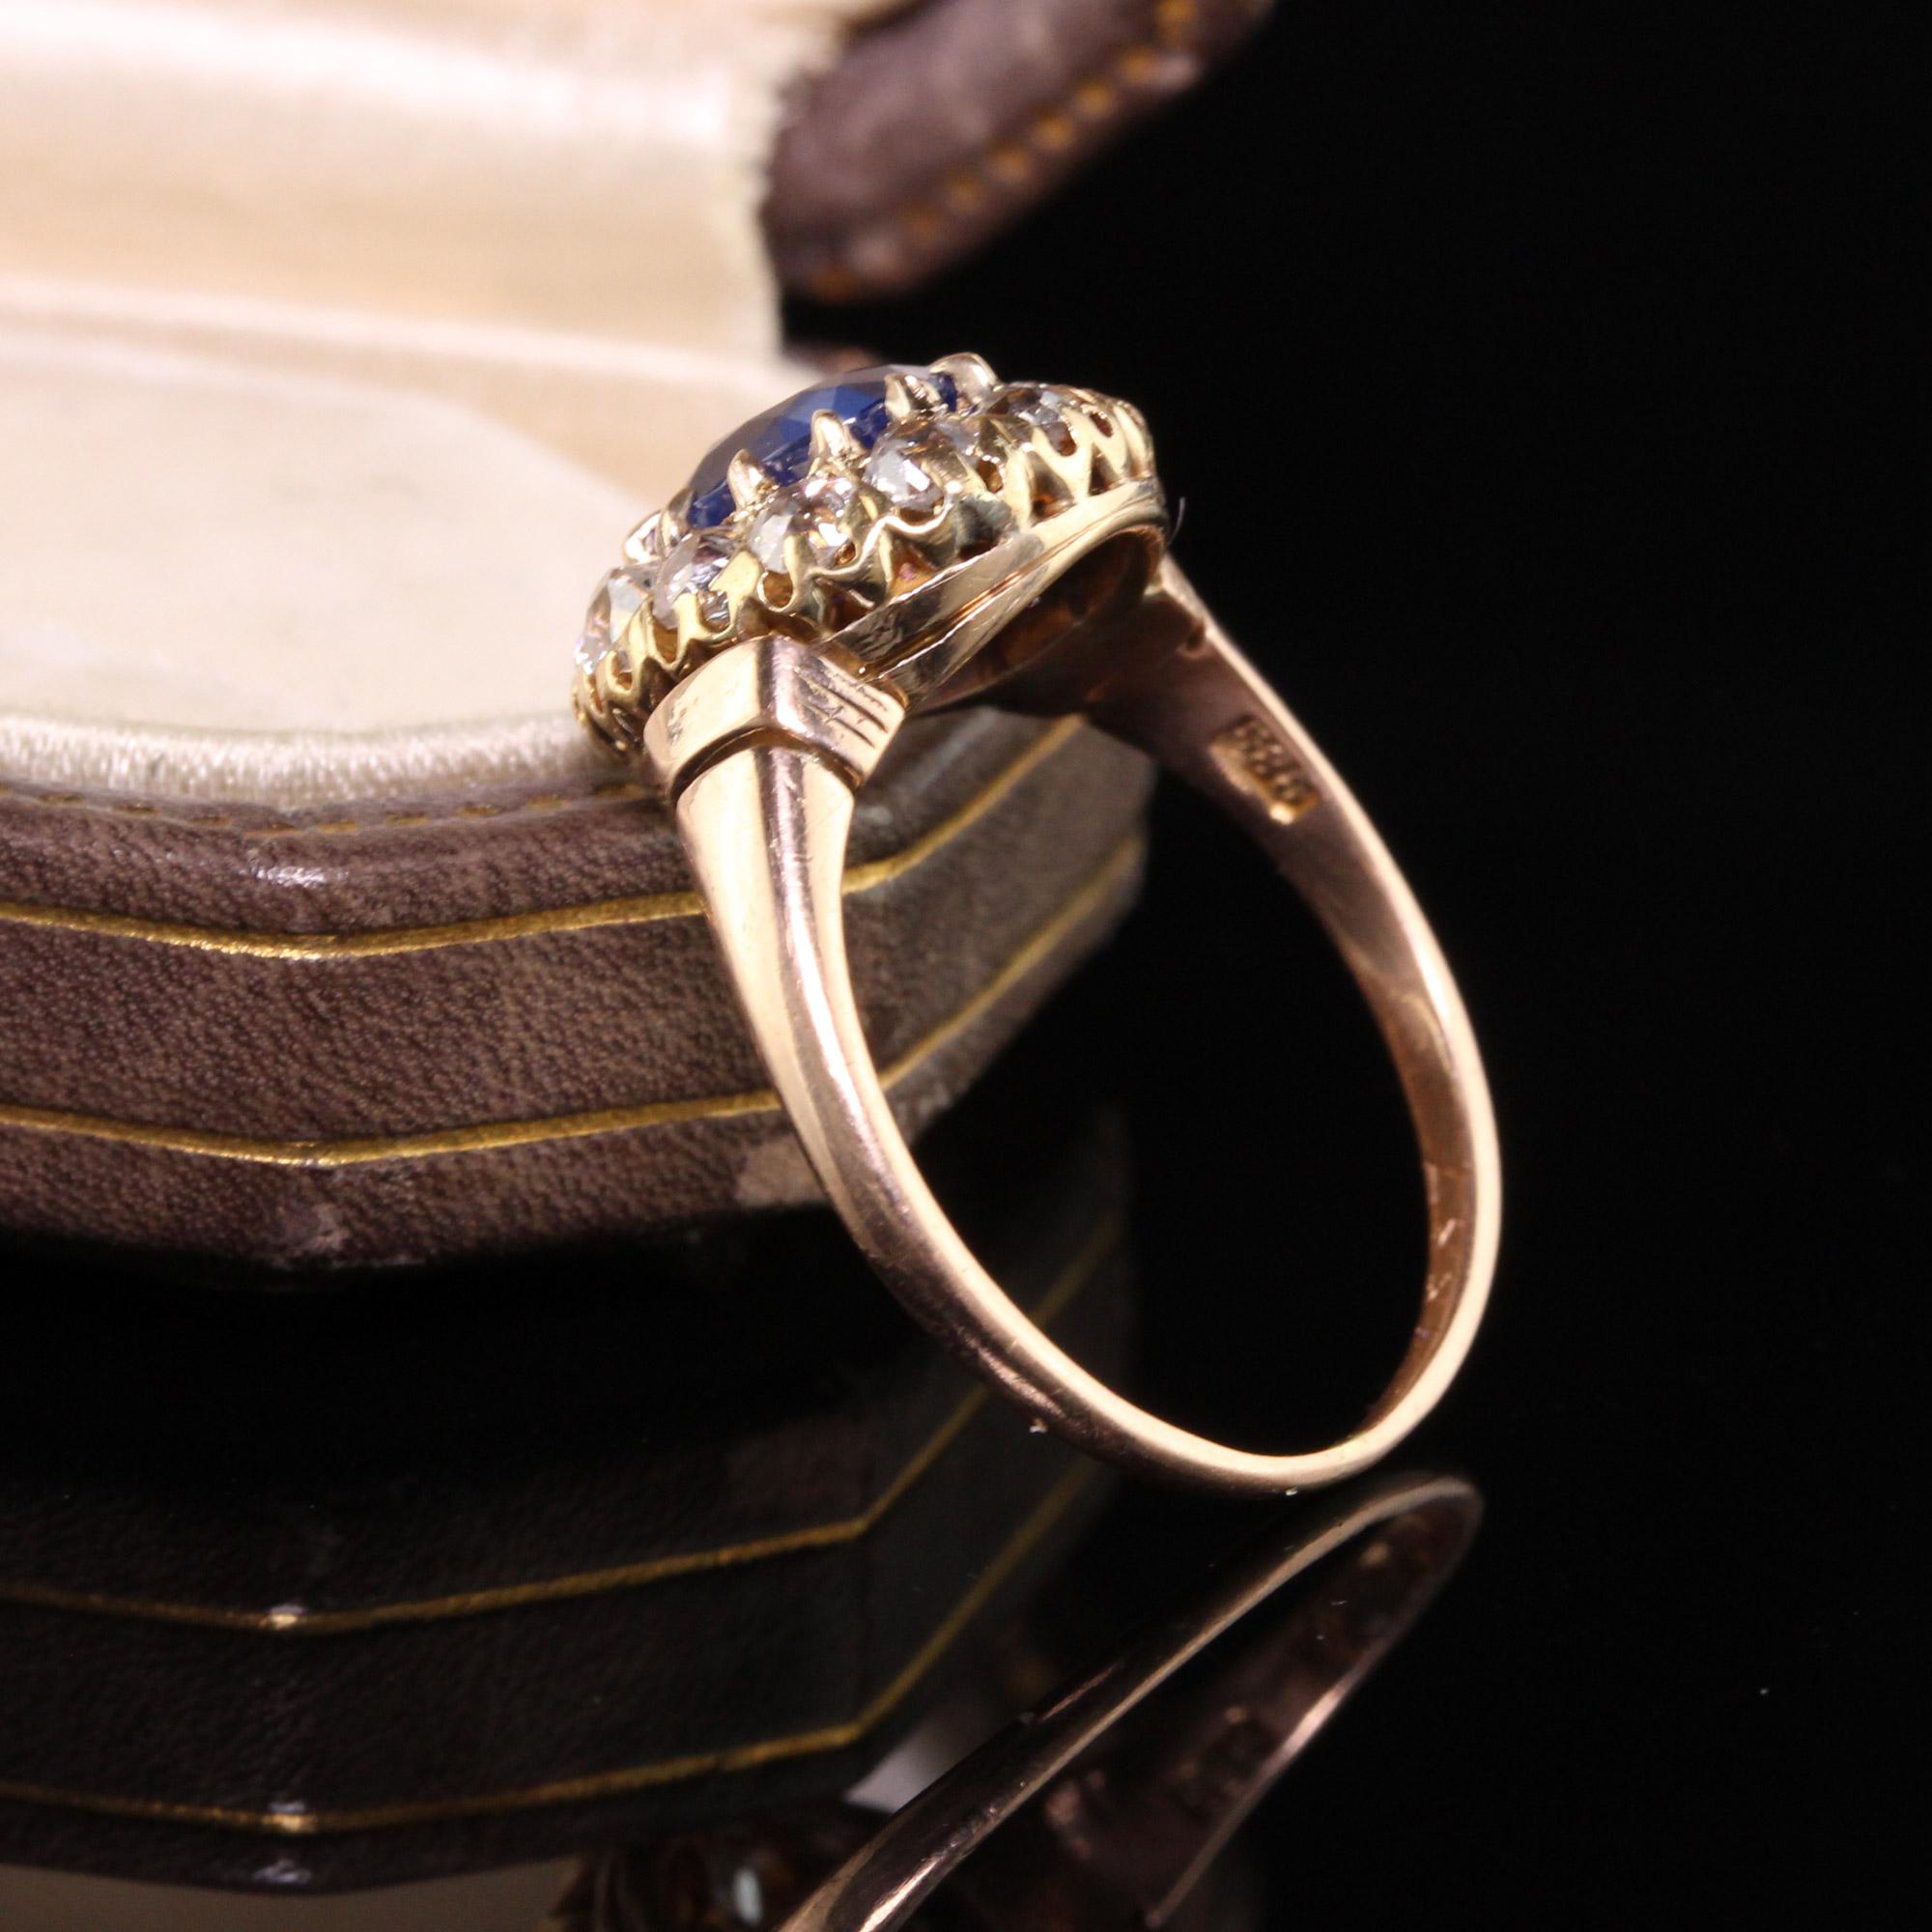 Beautiful Antique Victorian 14K Yellow Gold Kashmir Sapphire Diamond Engagement Ring. This incredible ring has a 1.18 ct Kashmir Sapphire in the center of a beautiful old mine diamond mounting dated from 1867. The center sapphire has a GIA report